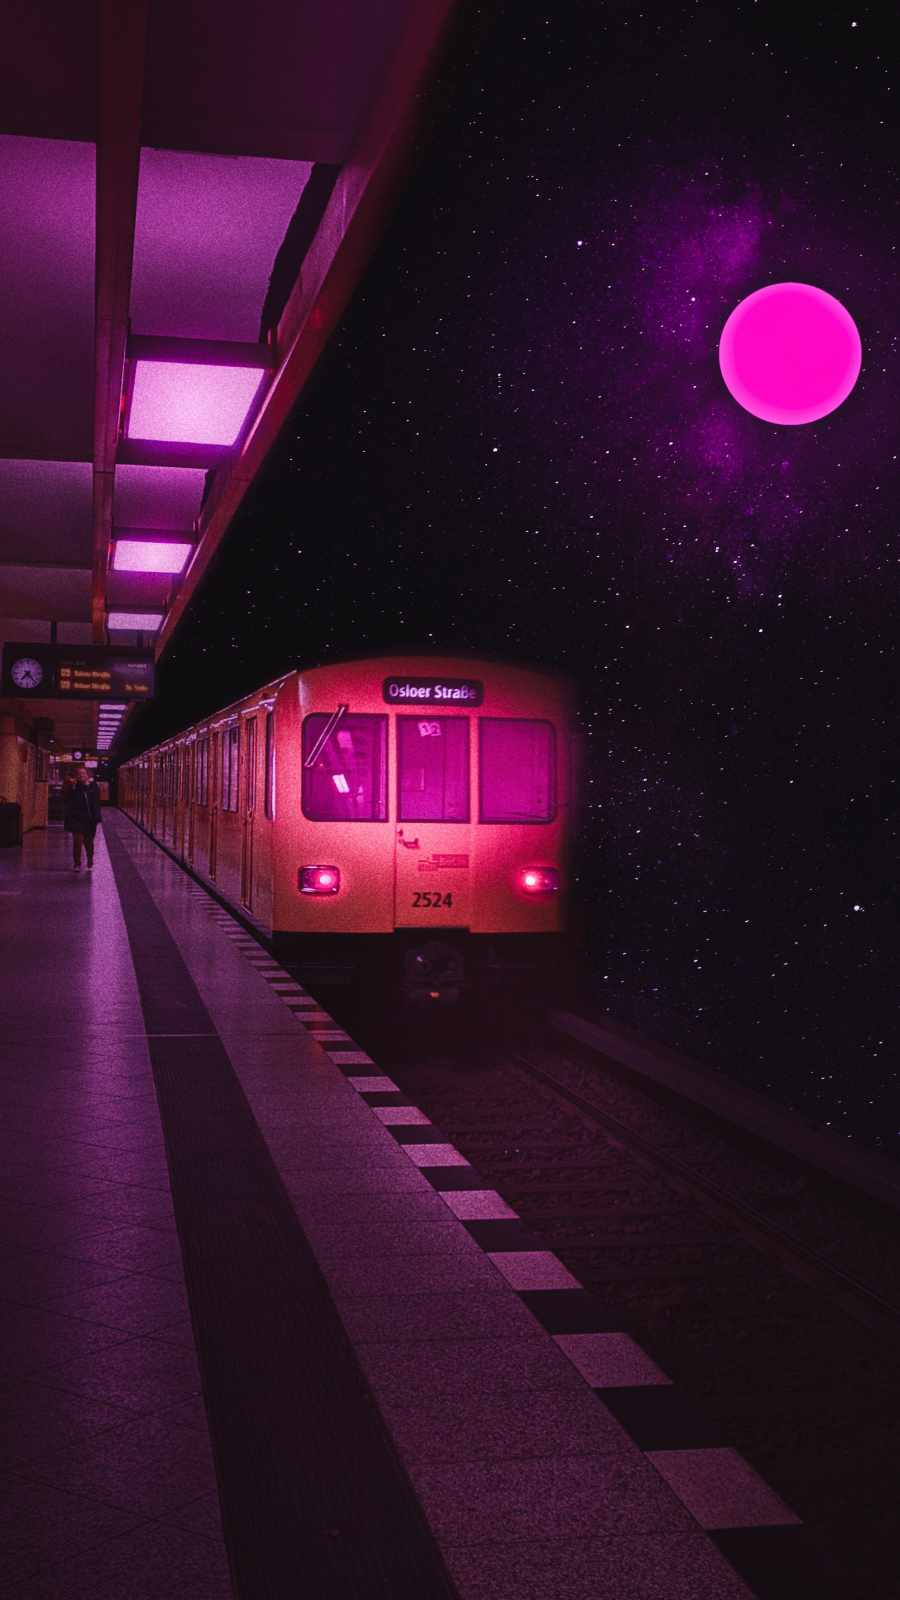 Subway Station Morning iPhone Wallpaper - iPhone Wallpapers